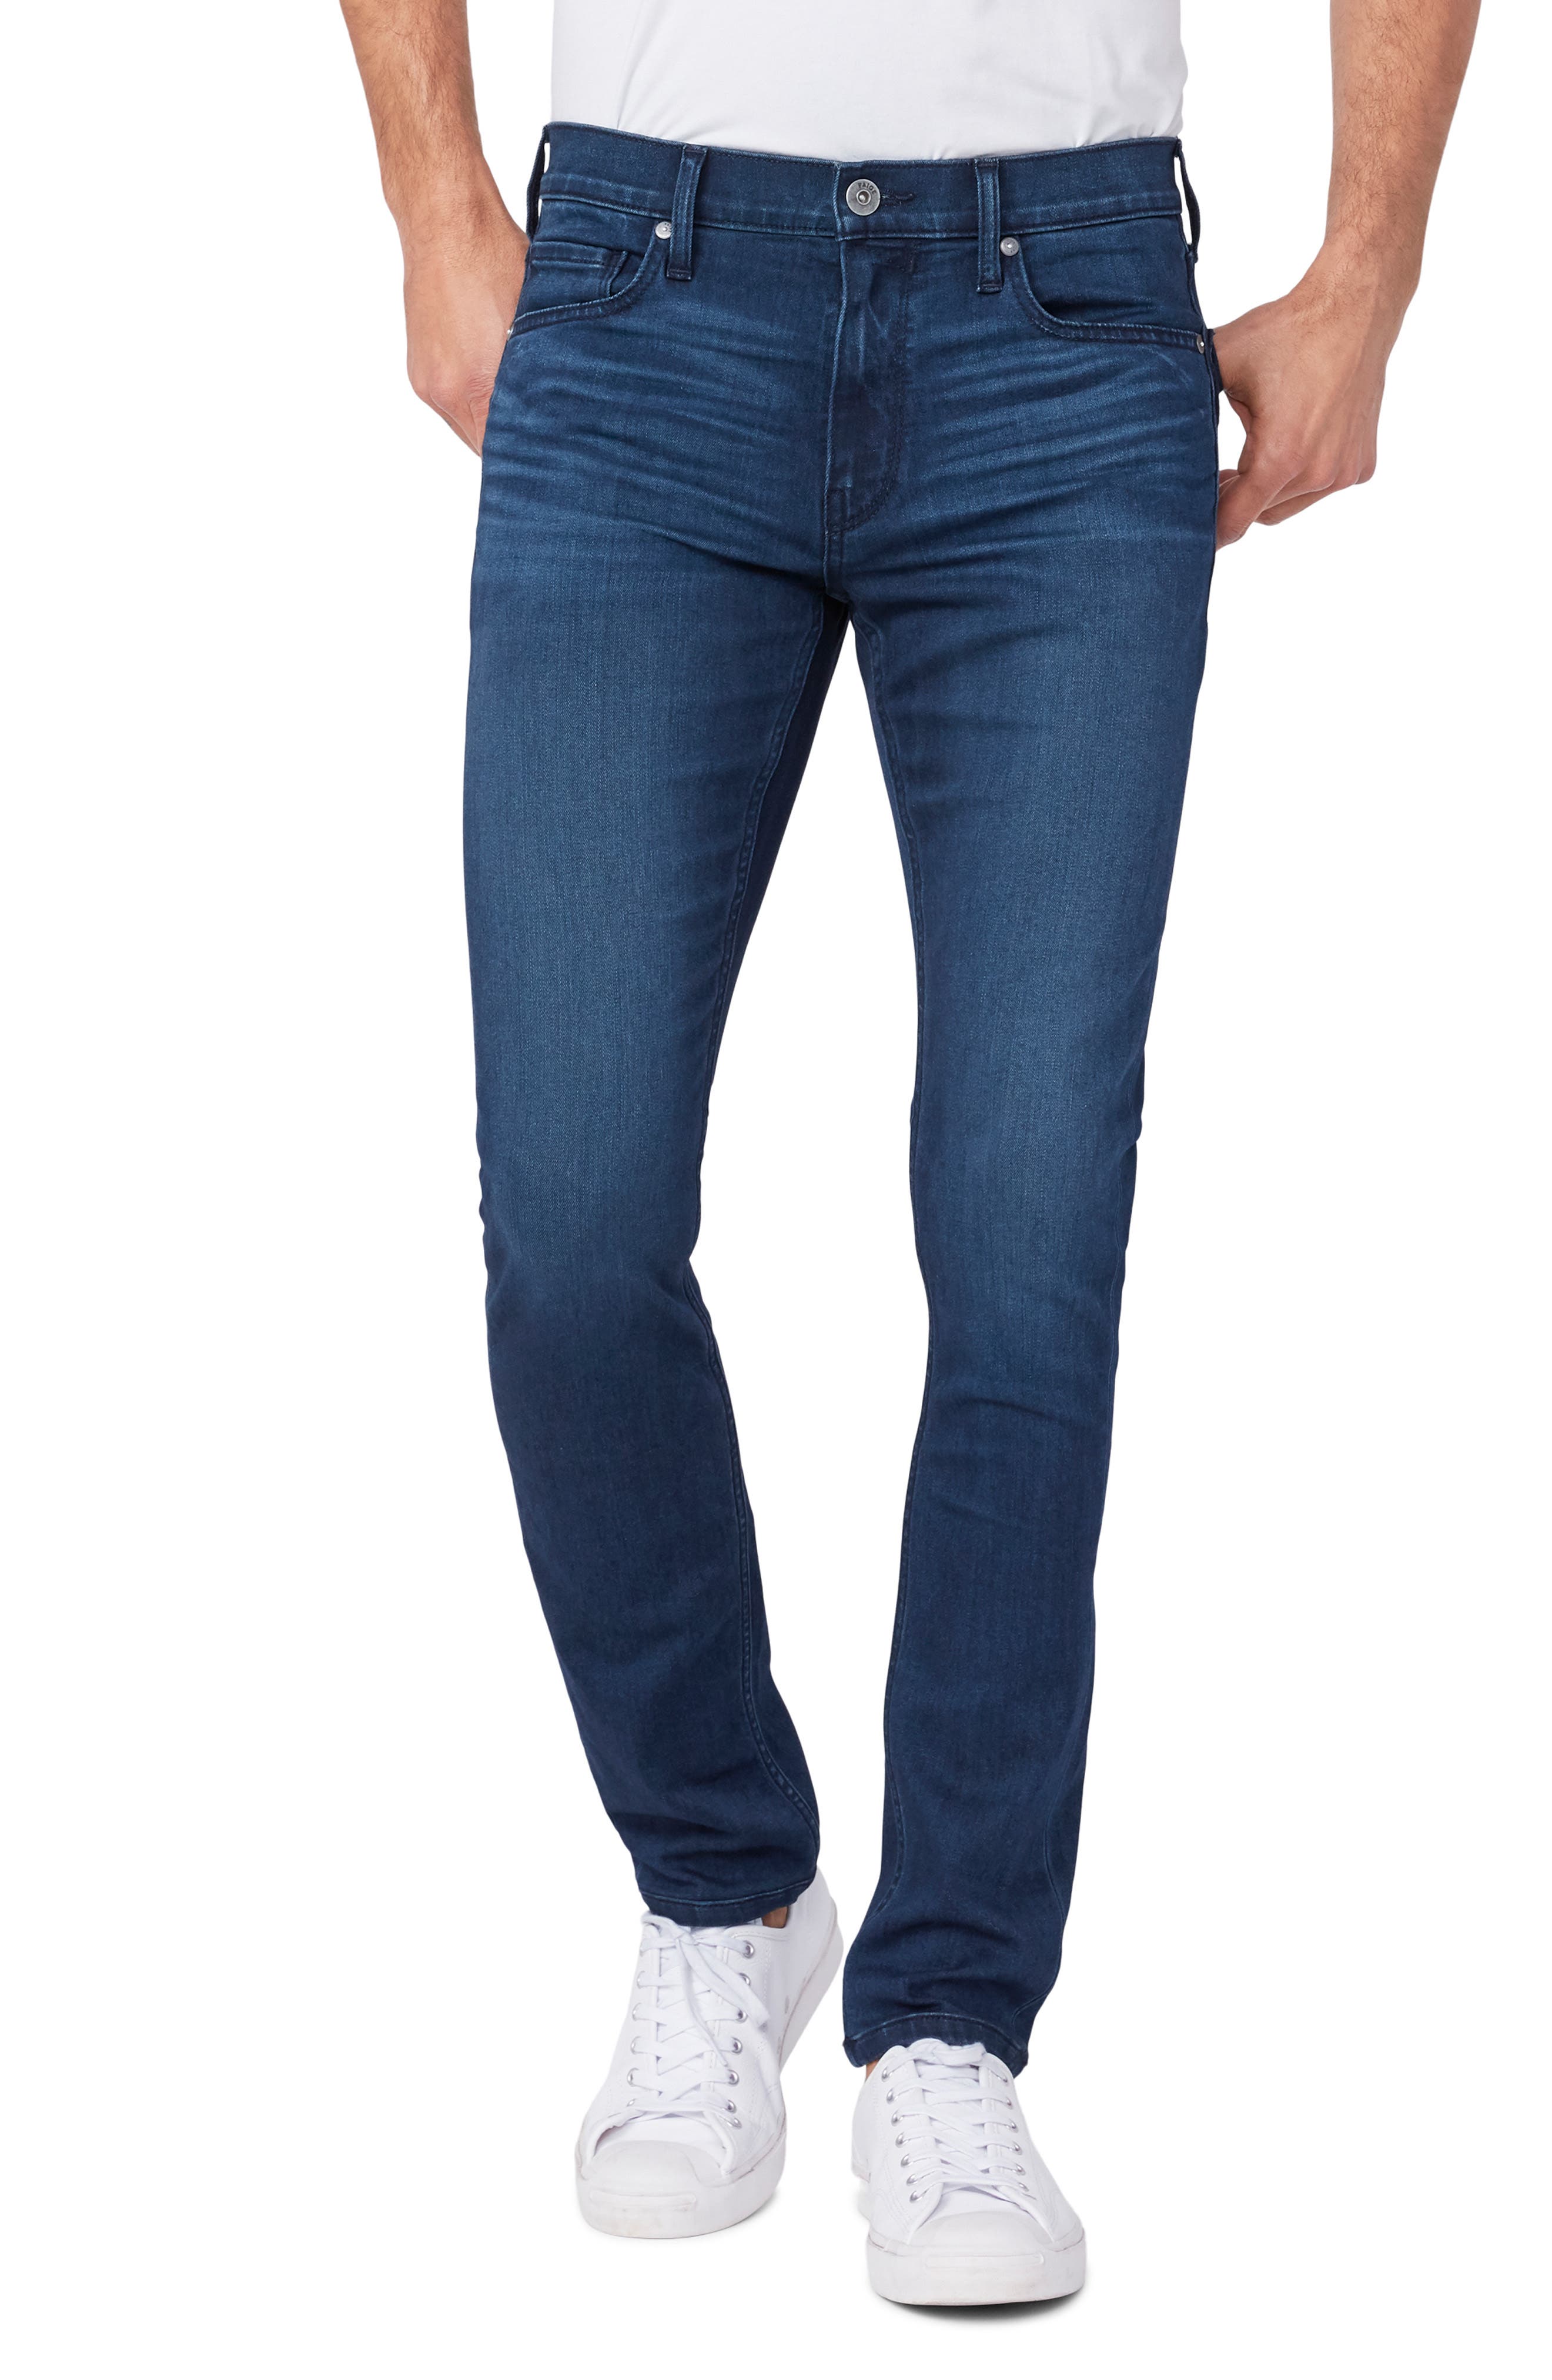 PAIGE Denim Federal Tapered Jeans in Blue for Men Mens Clothing Jeans Tapered jeans 